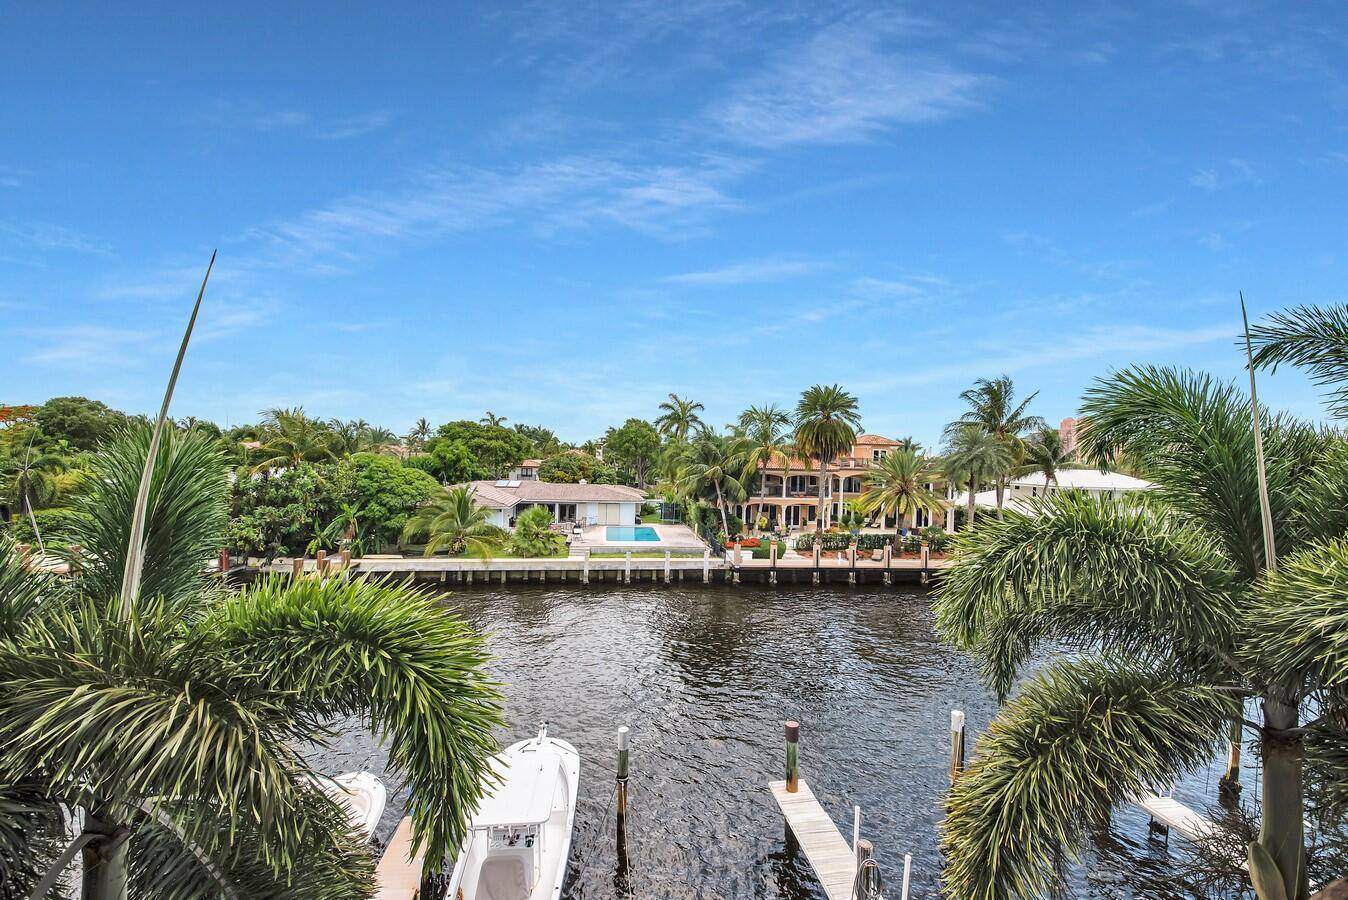 Create your own boaters paradise with this rarely available, stunning 2 bedroom, 2 bath intracoastal condo with a private boat dock.